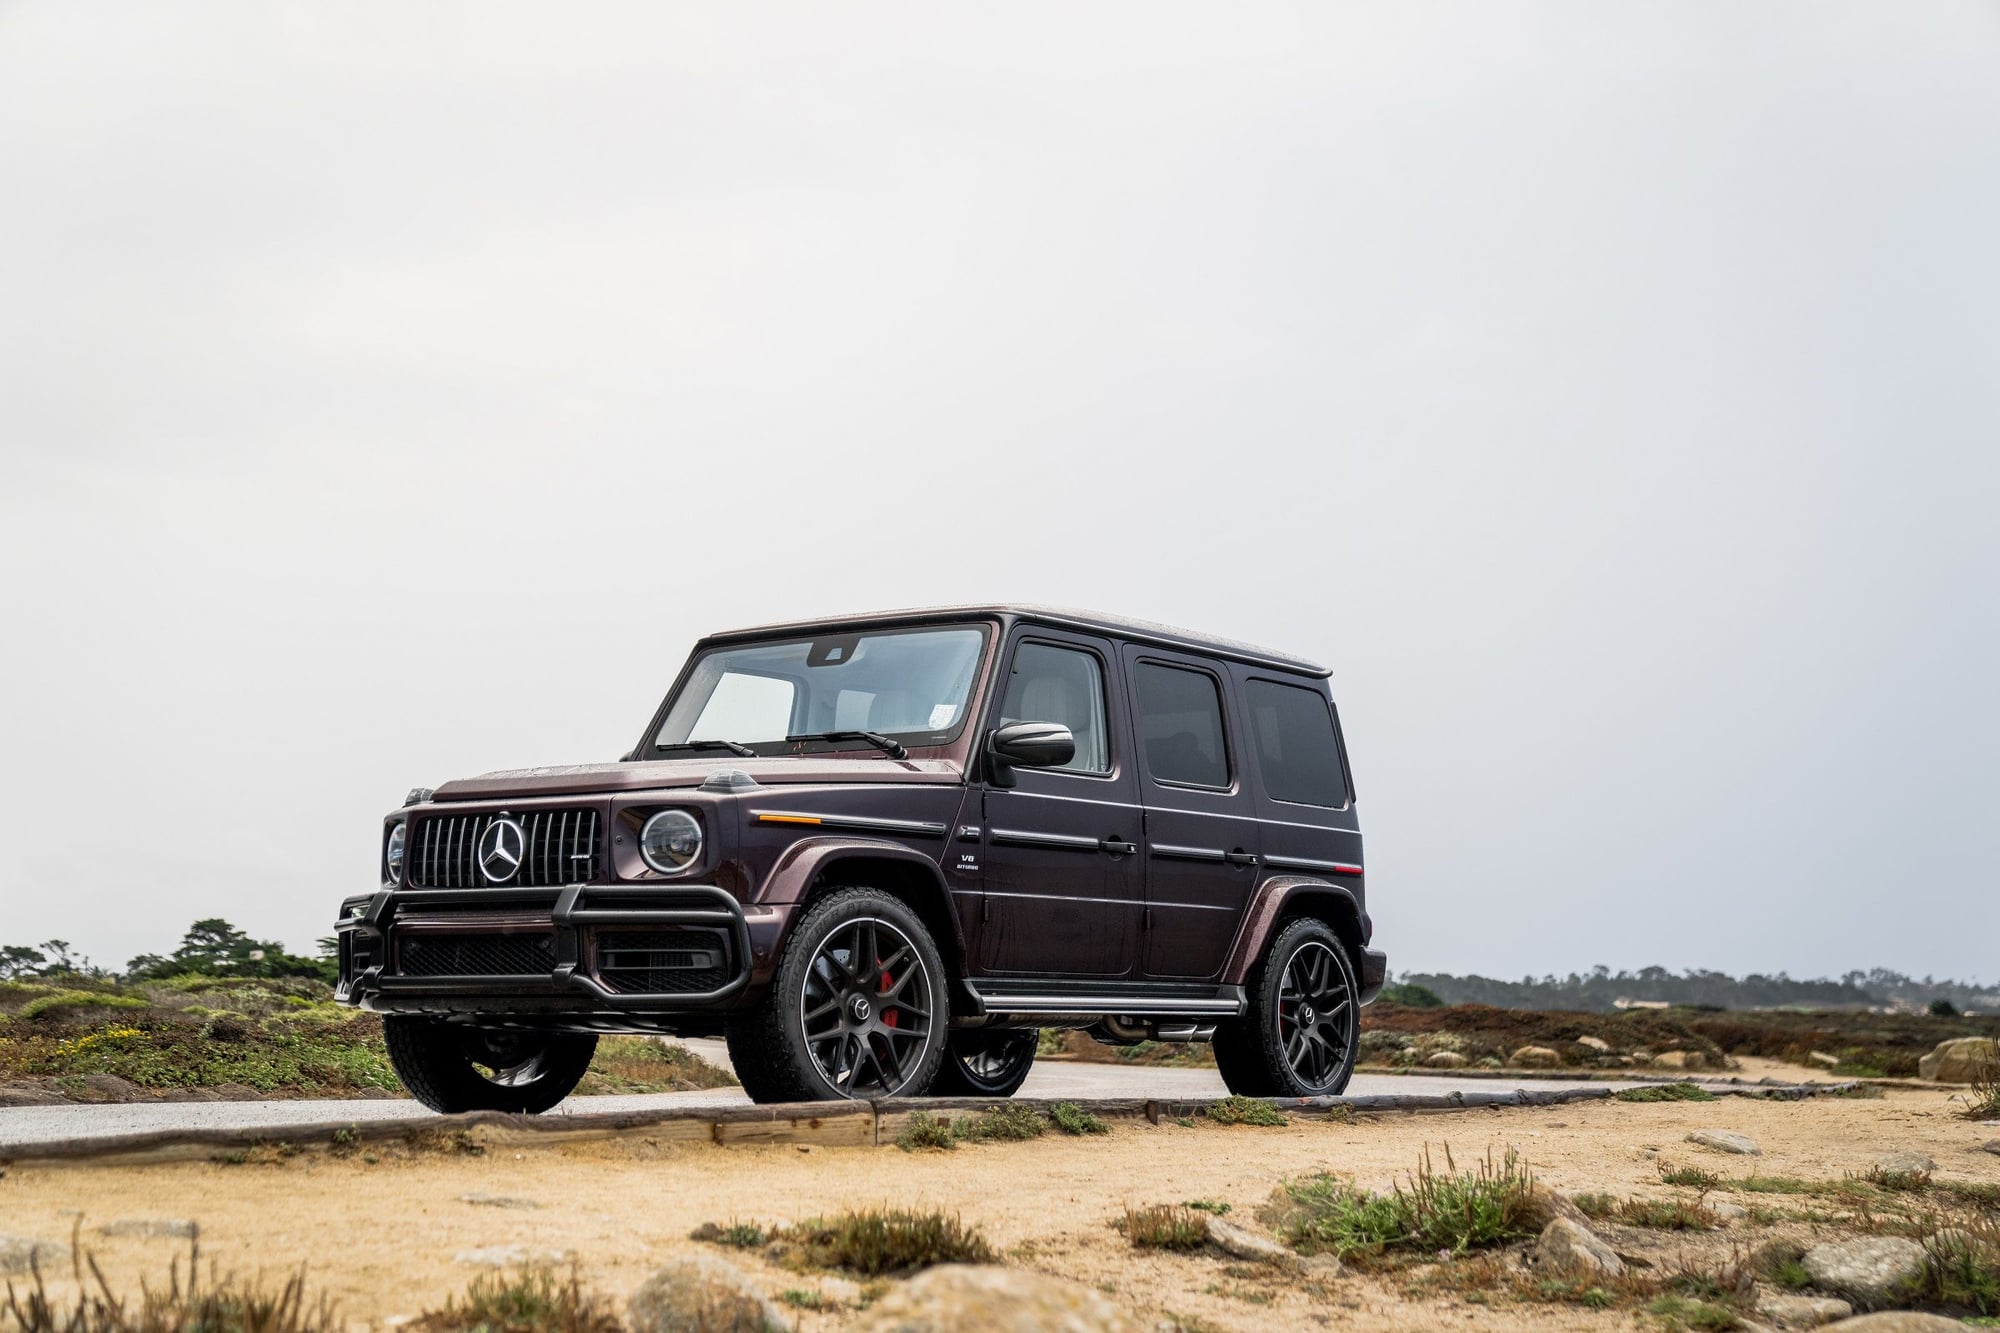 2022 Mercedes-Benz G-Class - 2022 Mercedes G63 - Used - VIN W1NYC7HJ3NX437479 - 5,950 Miles - 8 cyl - 4WD - Automatic - SUV - Red - Sf Bay Area, CA 94027, United States